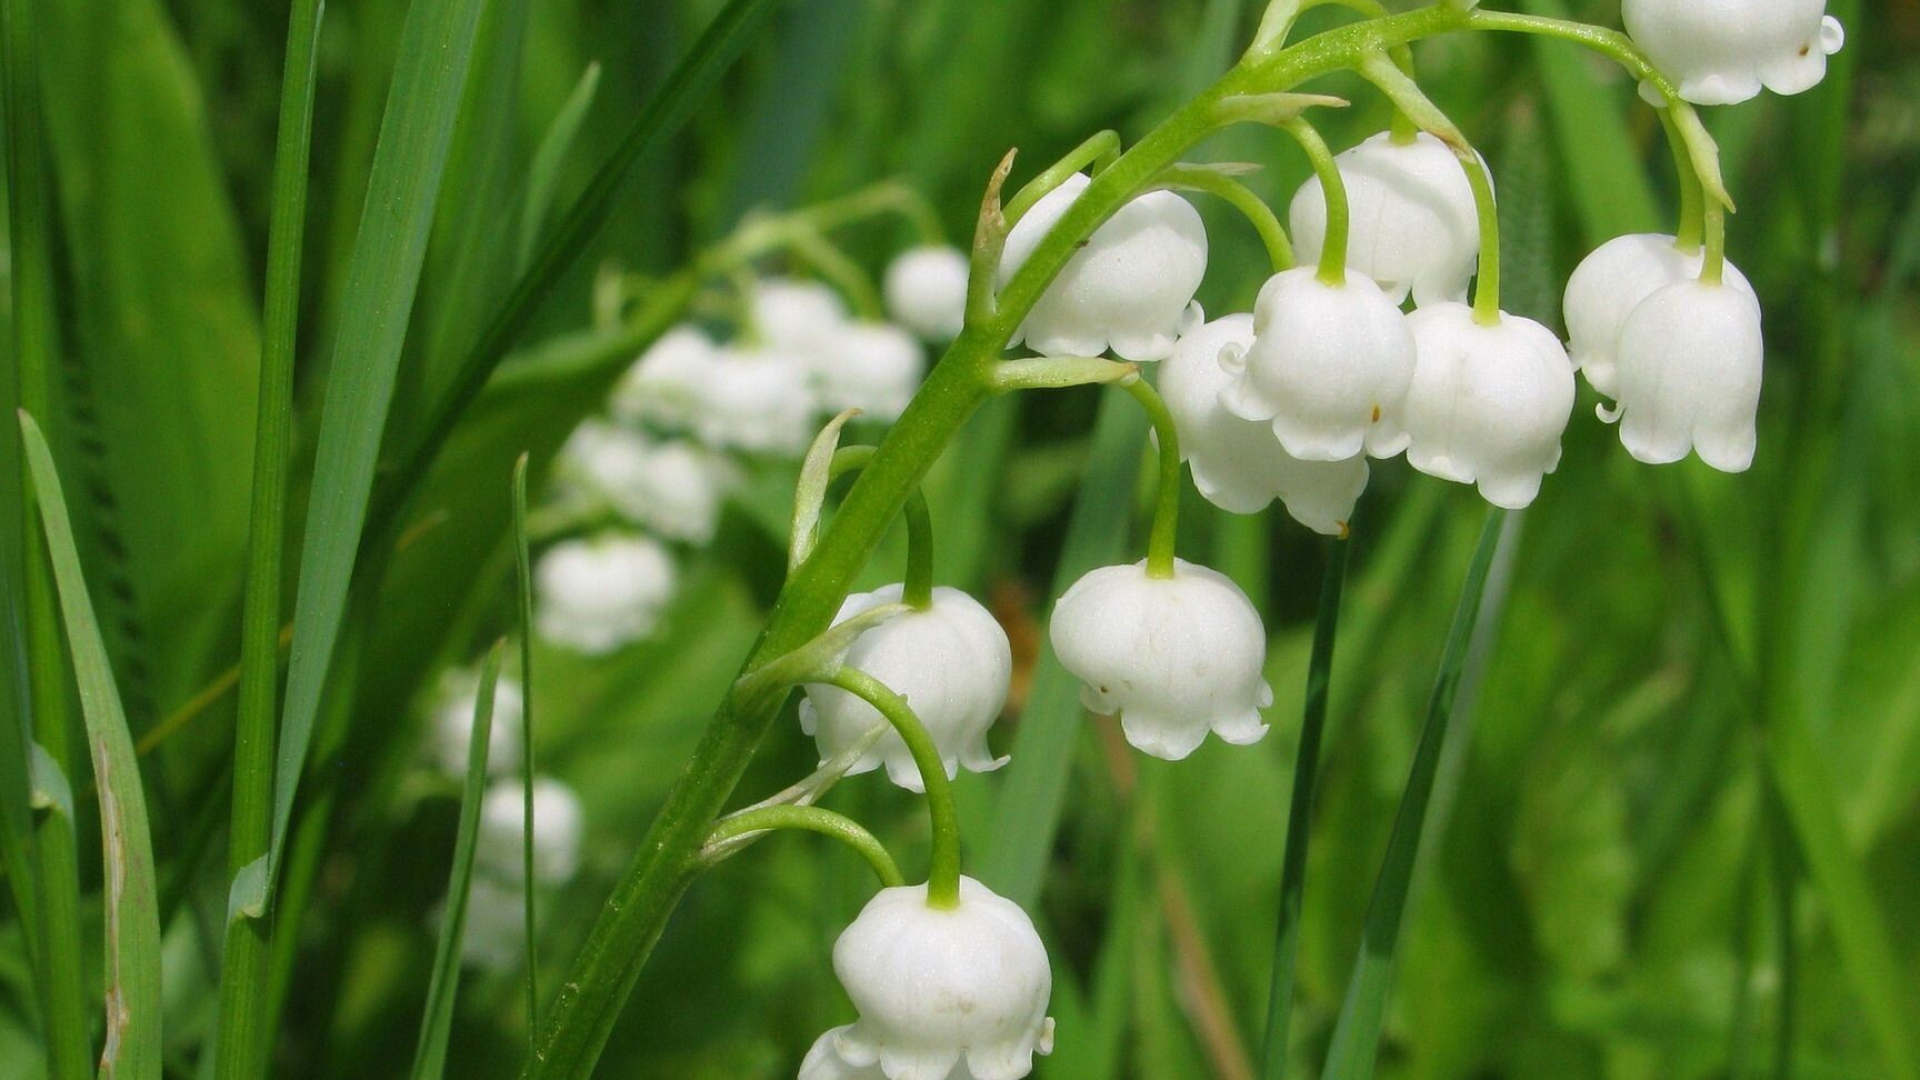 Lily of the Valley: An extremely tough plant and it will grow in almost any type of soil or climate, May bells. 1920x1080 Full HD Wallpaper.